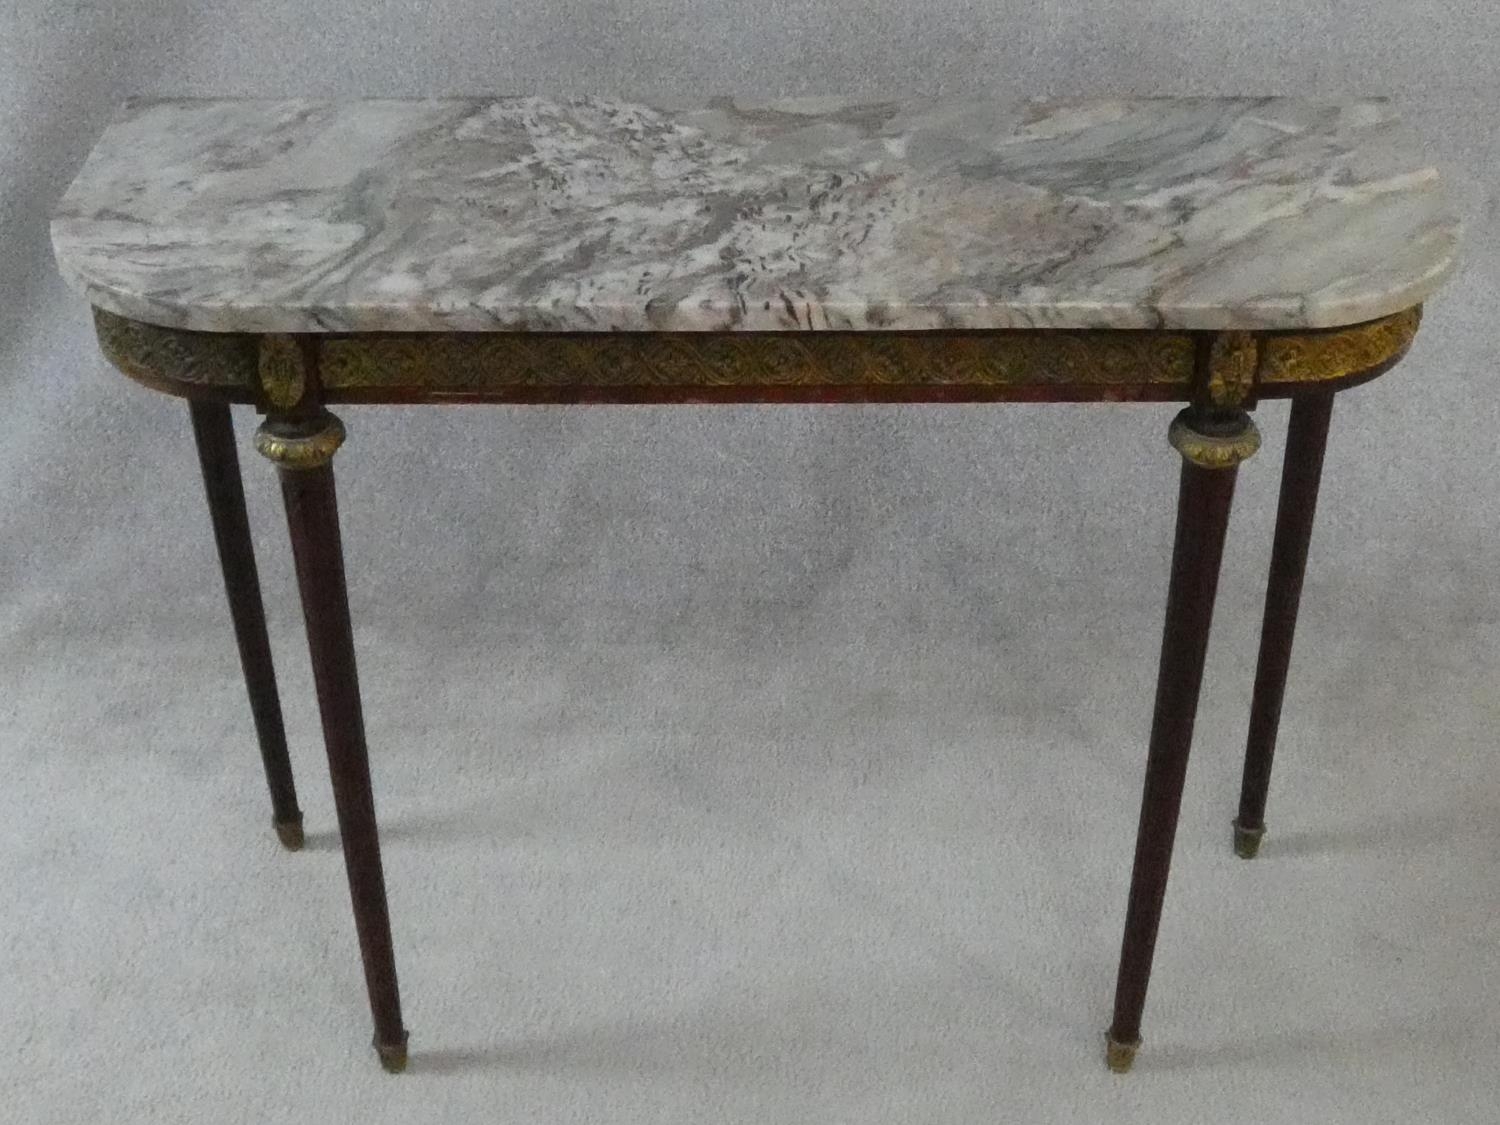 A Louis XVI style mahogany console table with grey veined marble top and ormolu mounts to the frieze